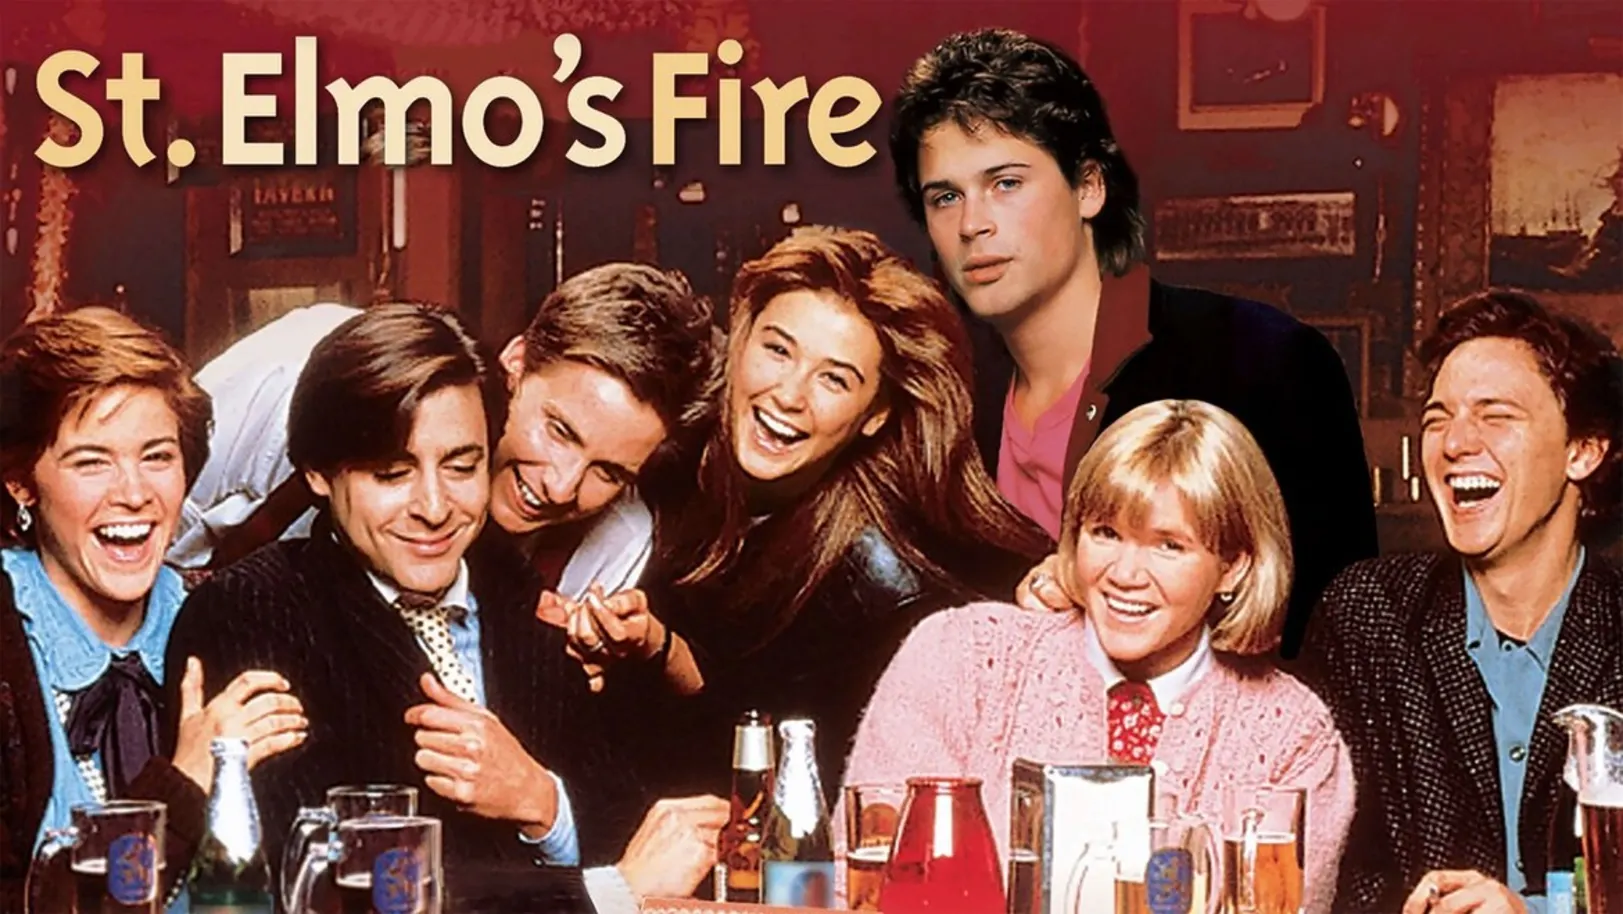 St. Elmo's Fire Streaming Now On &Prive HD